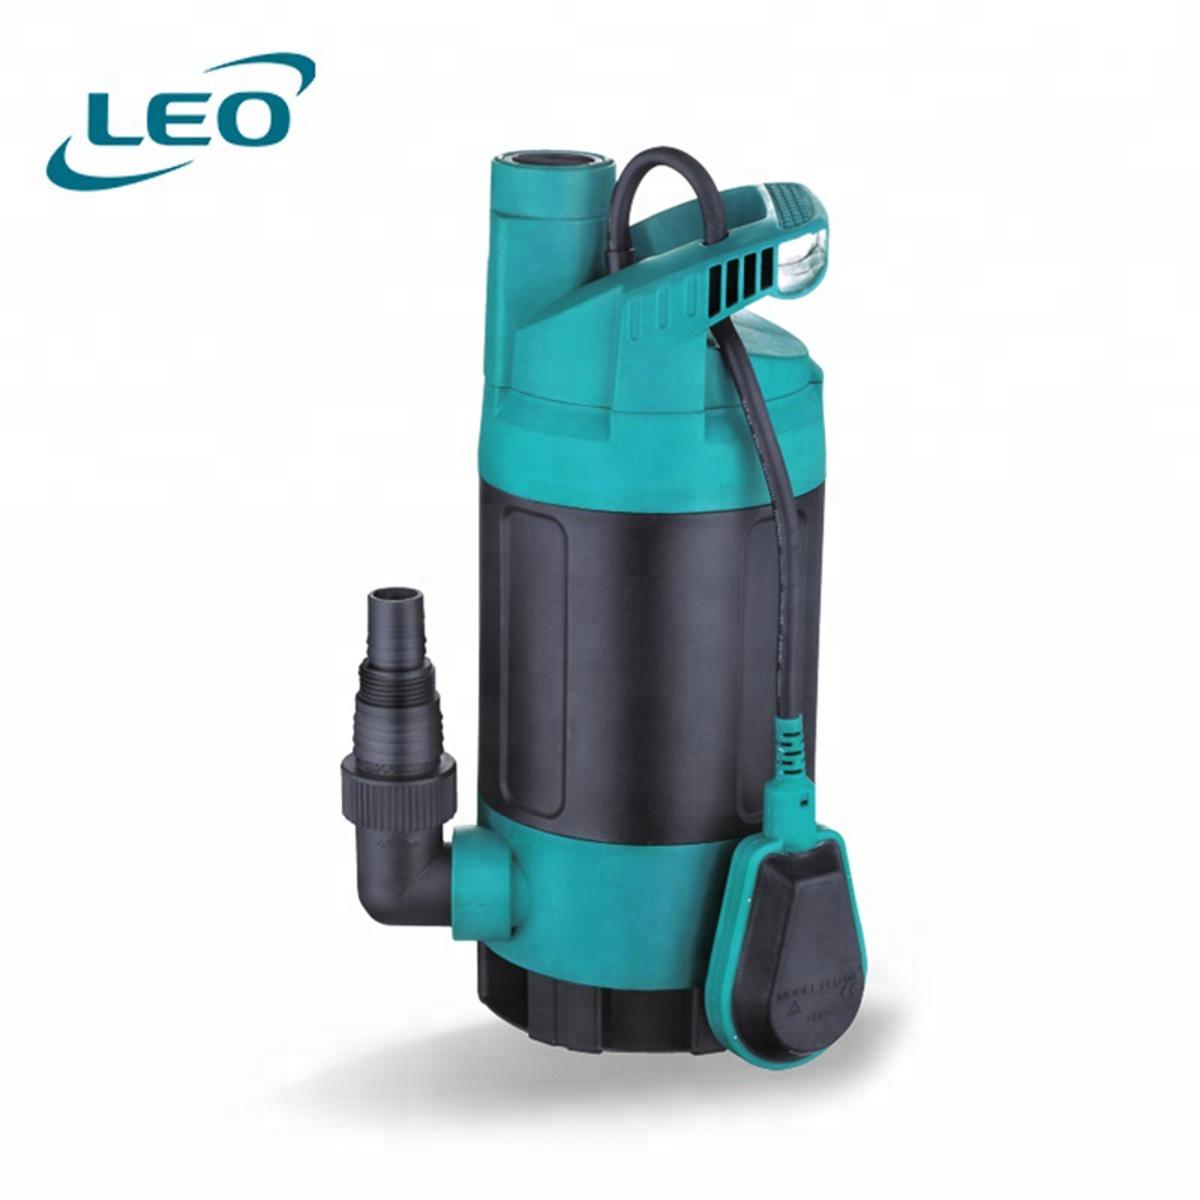 LEO - LKS-750PW - 750 W - 1 HP  Rust Free ENGINEERED PLASTIC DIRTY Water Submersible Pump With FLOAT SWITCH FOR AUTOMATIC OPERATION- European STANDARD Water Pump